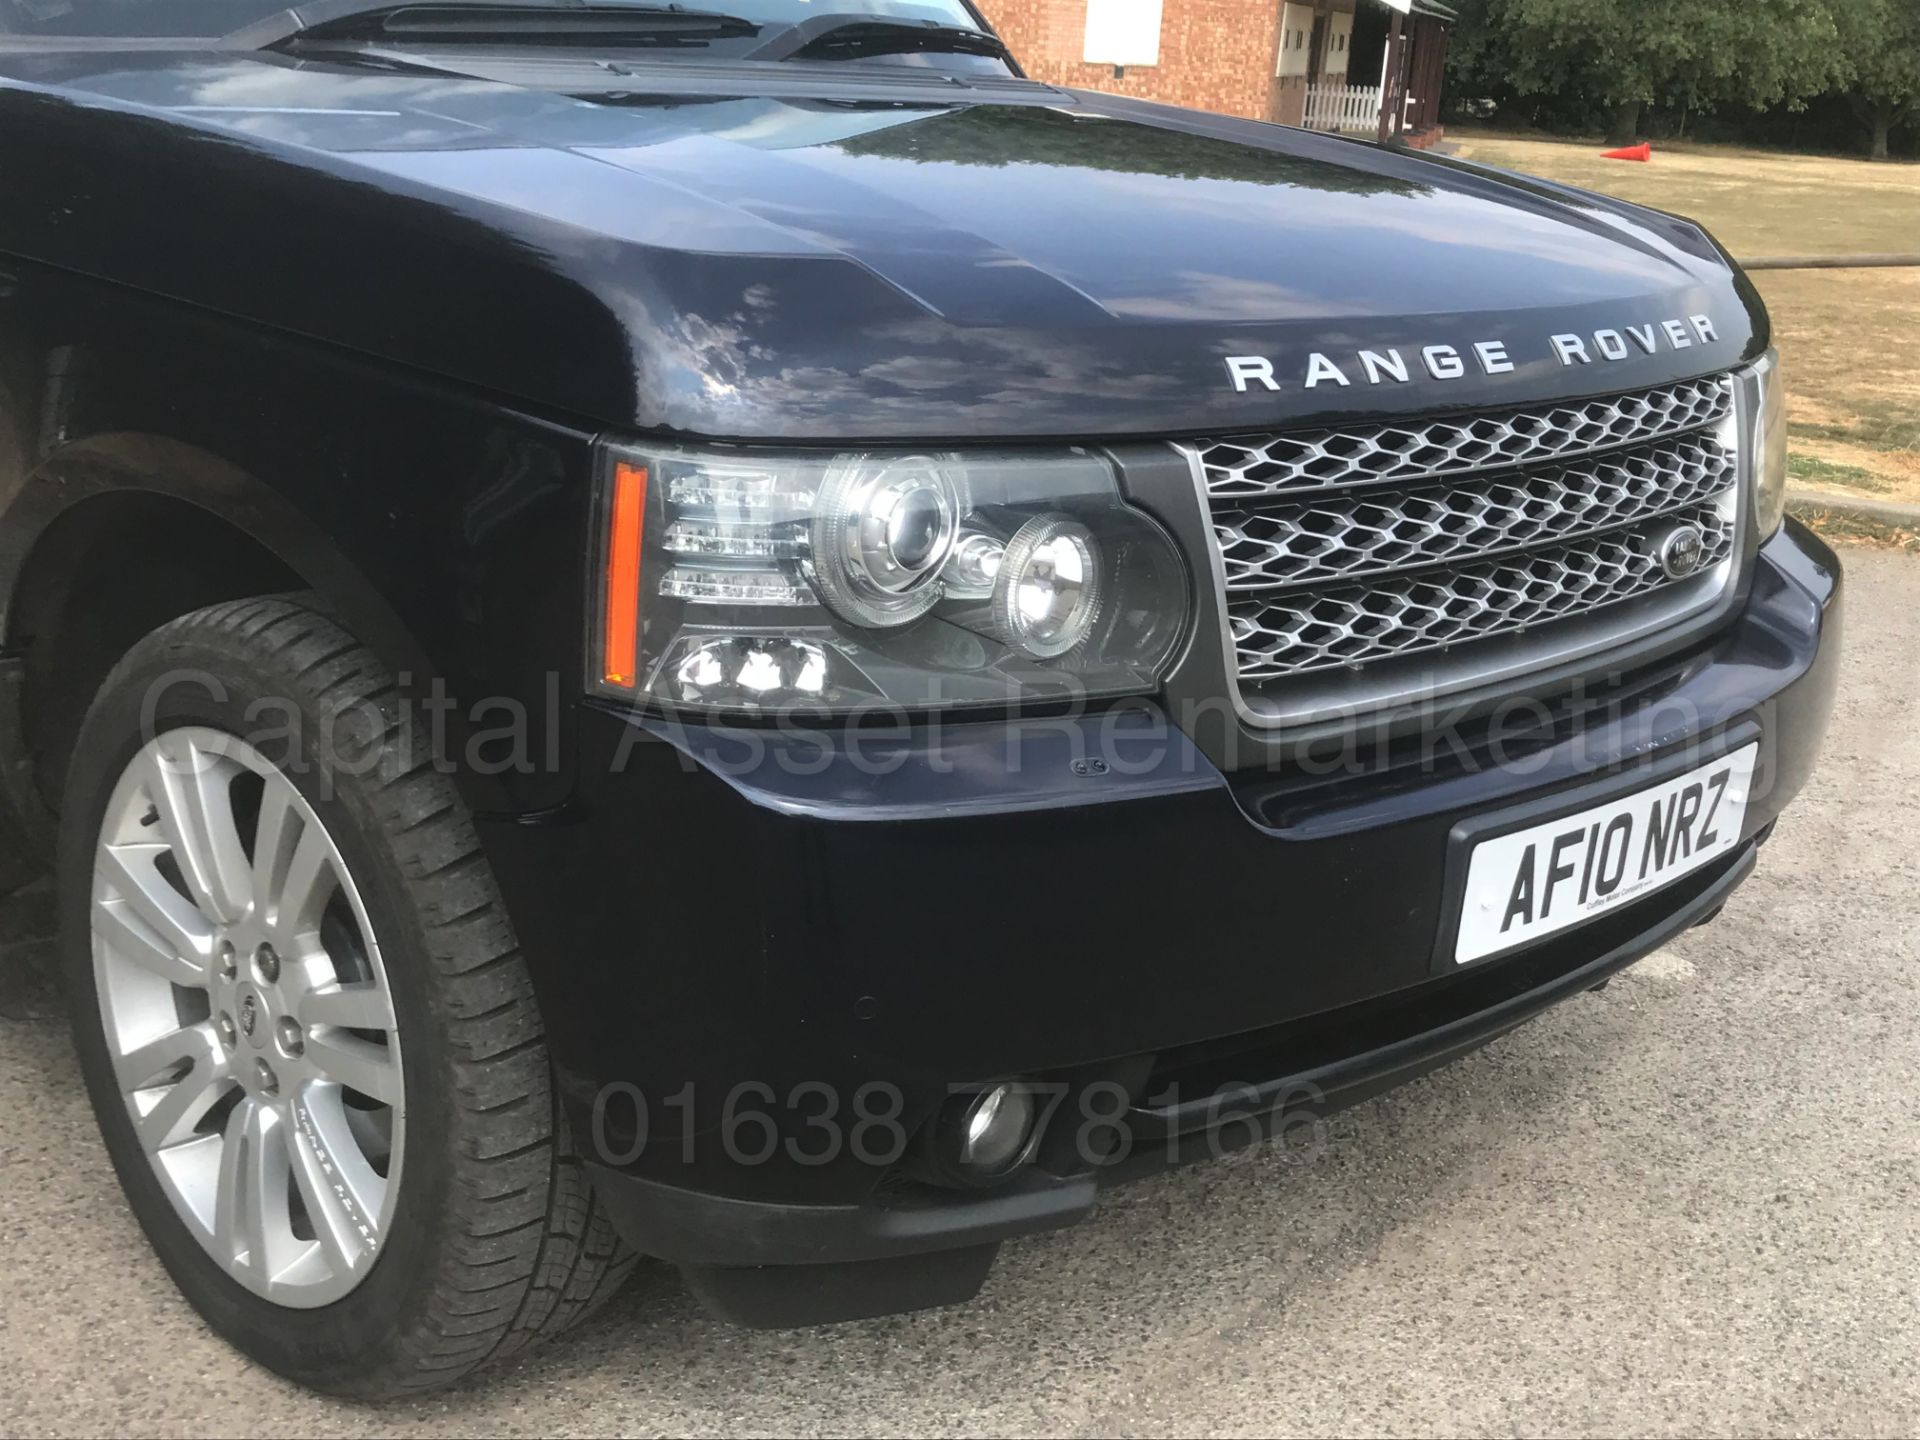 (On Sale) RANGE ROVER VOGUE **SE EDITION** (2010 - FACELIFT EDITION) 'TDV8 - 268 BHP - AUTO' **WOW** - Image 15 of 62